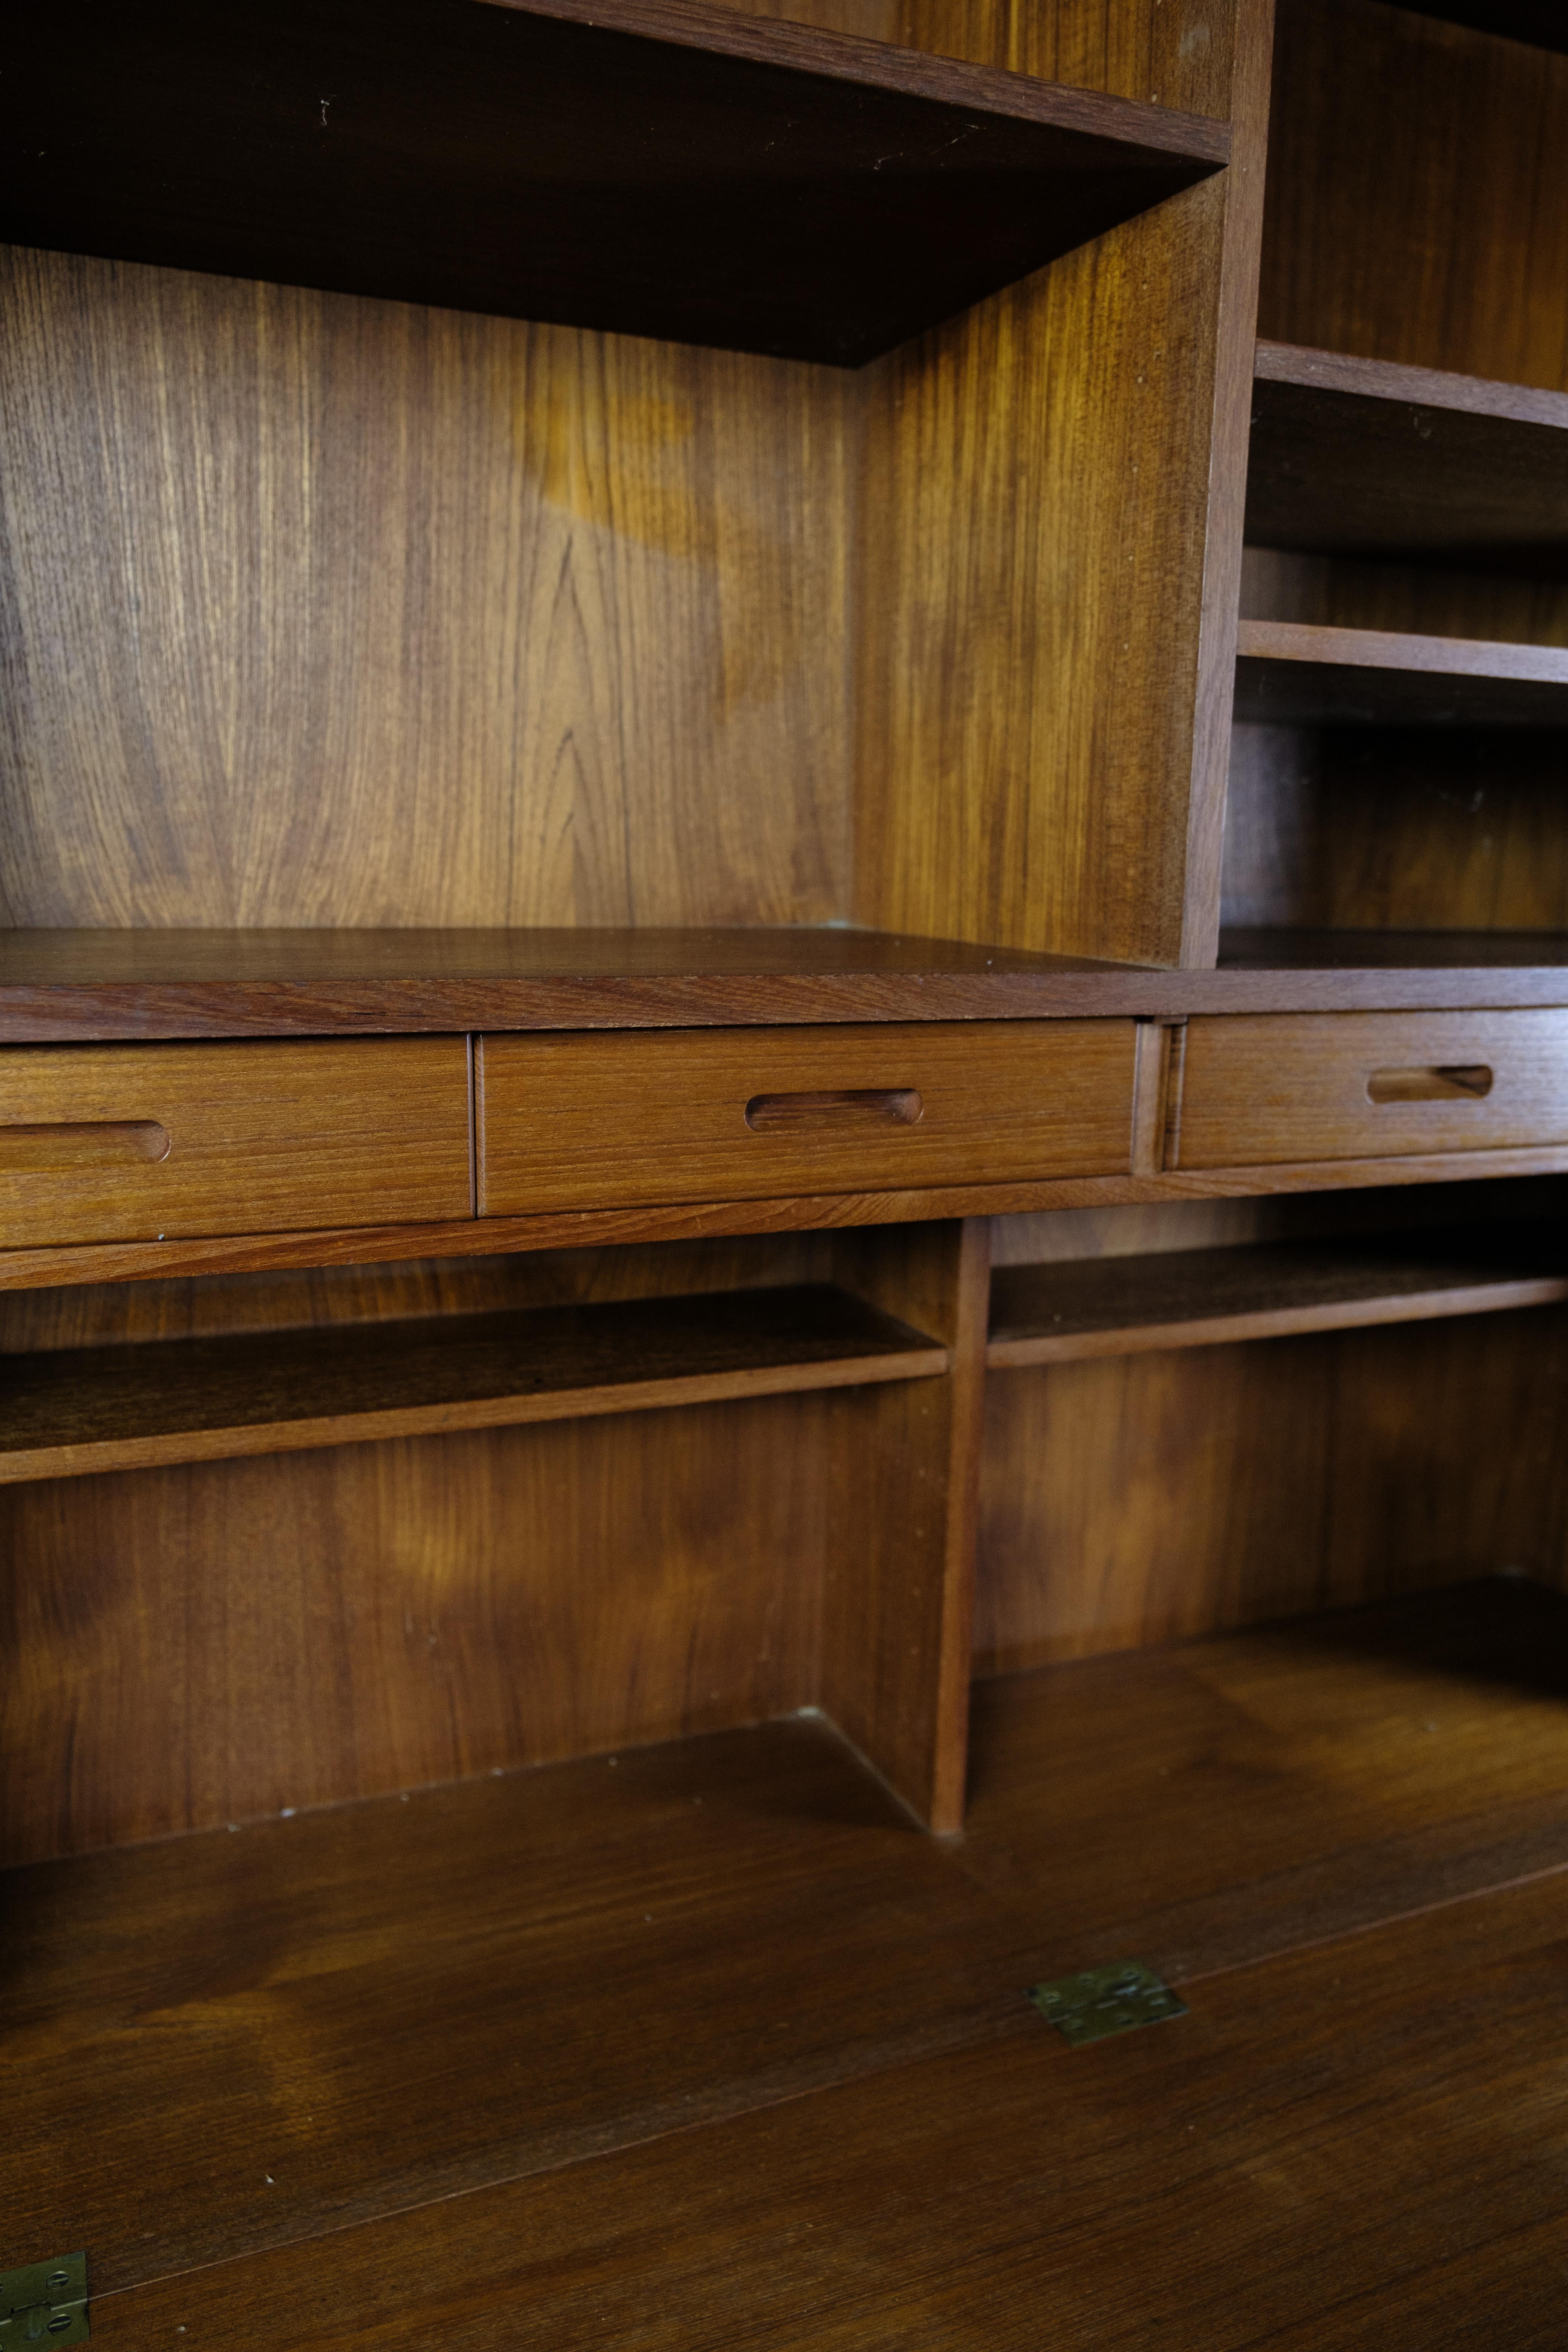 Mid-20th Century Bookcase With Secretary/Desk Made In Teak, Danish Design From 1960s For Sale